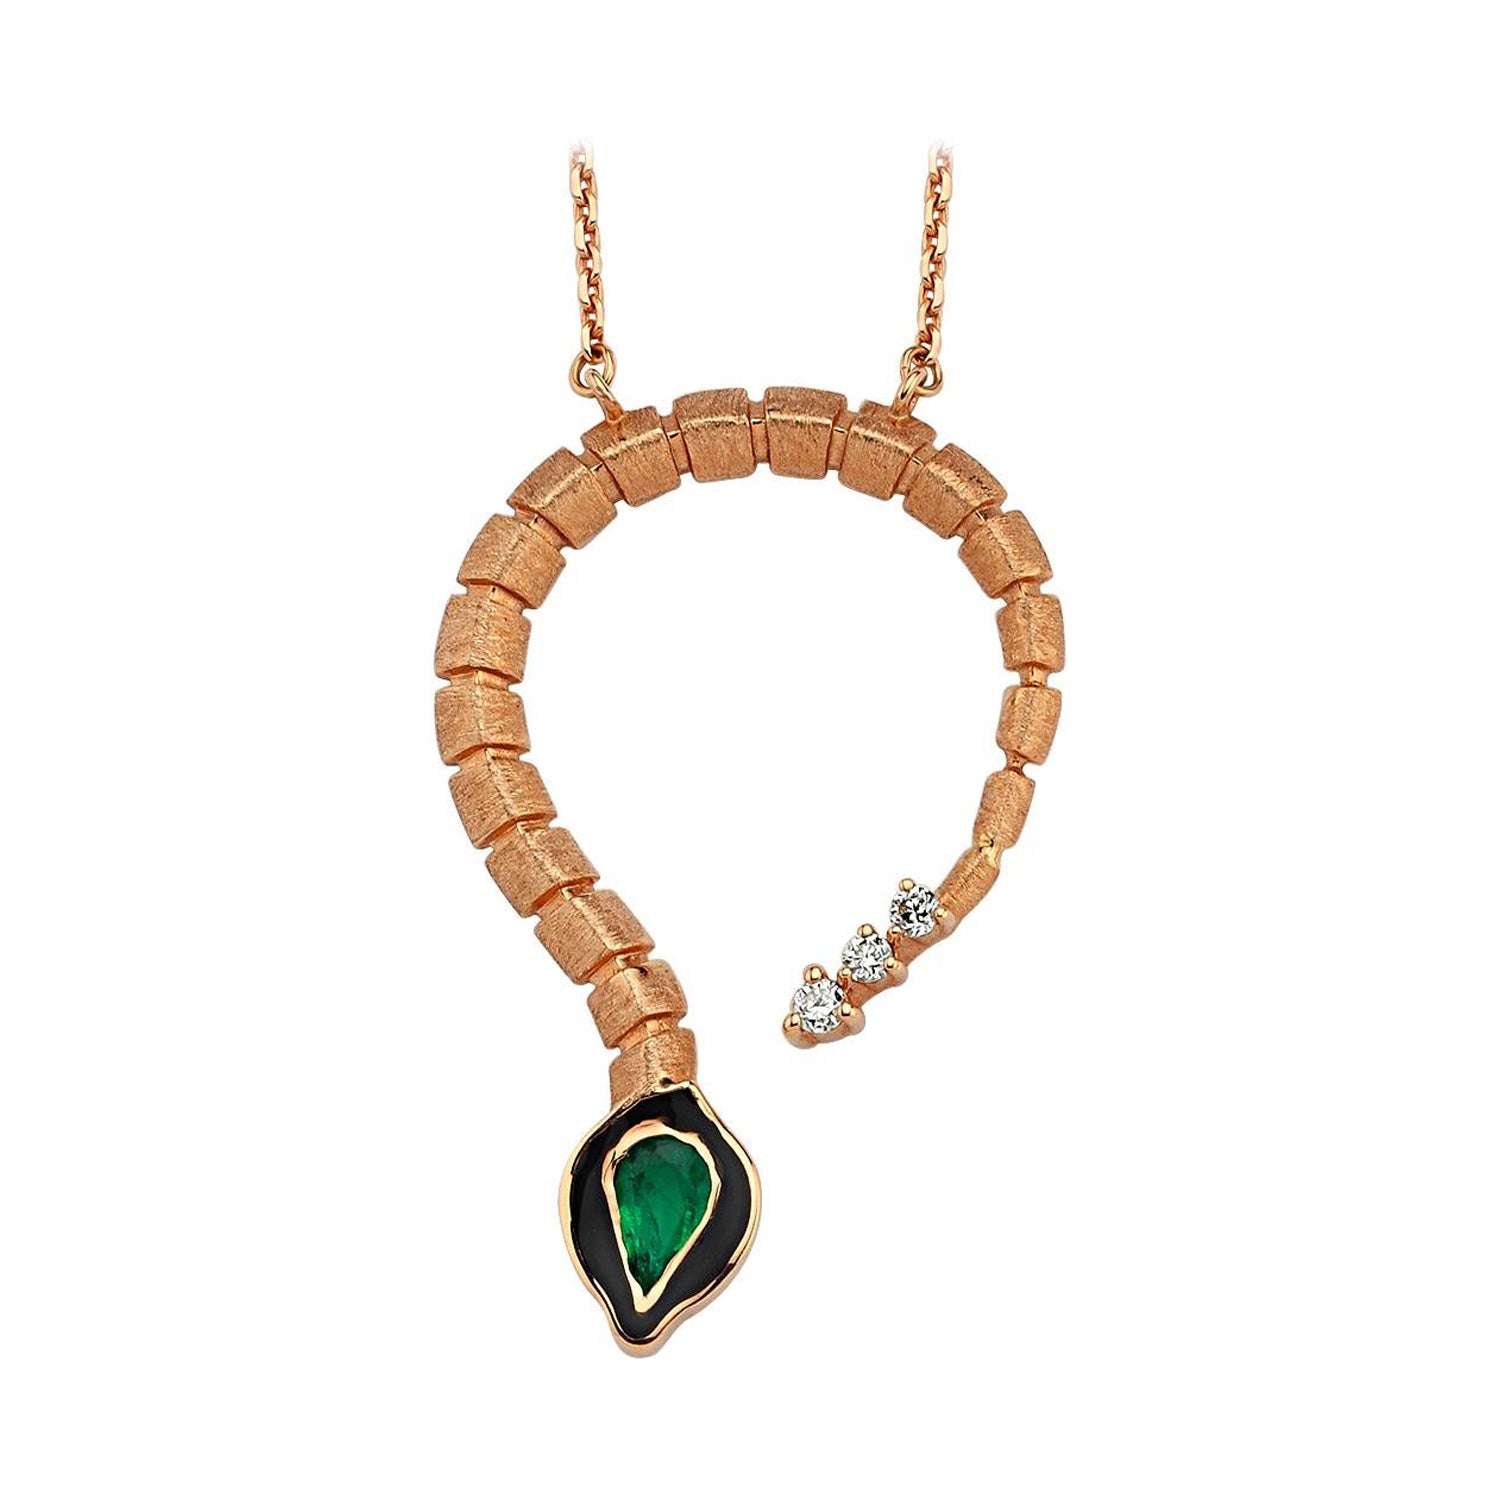 Baby Dragon Necklace in 14K Rose Gold with 0.21ct Emerald by Selda Jewellery